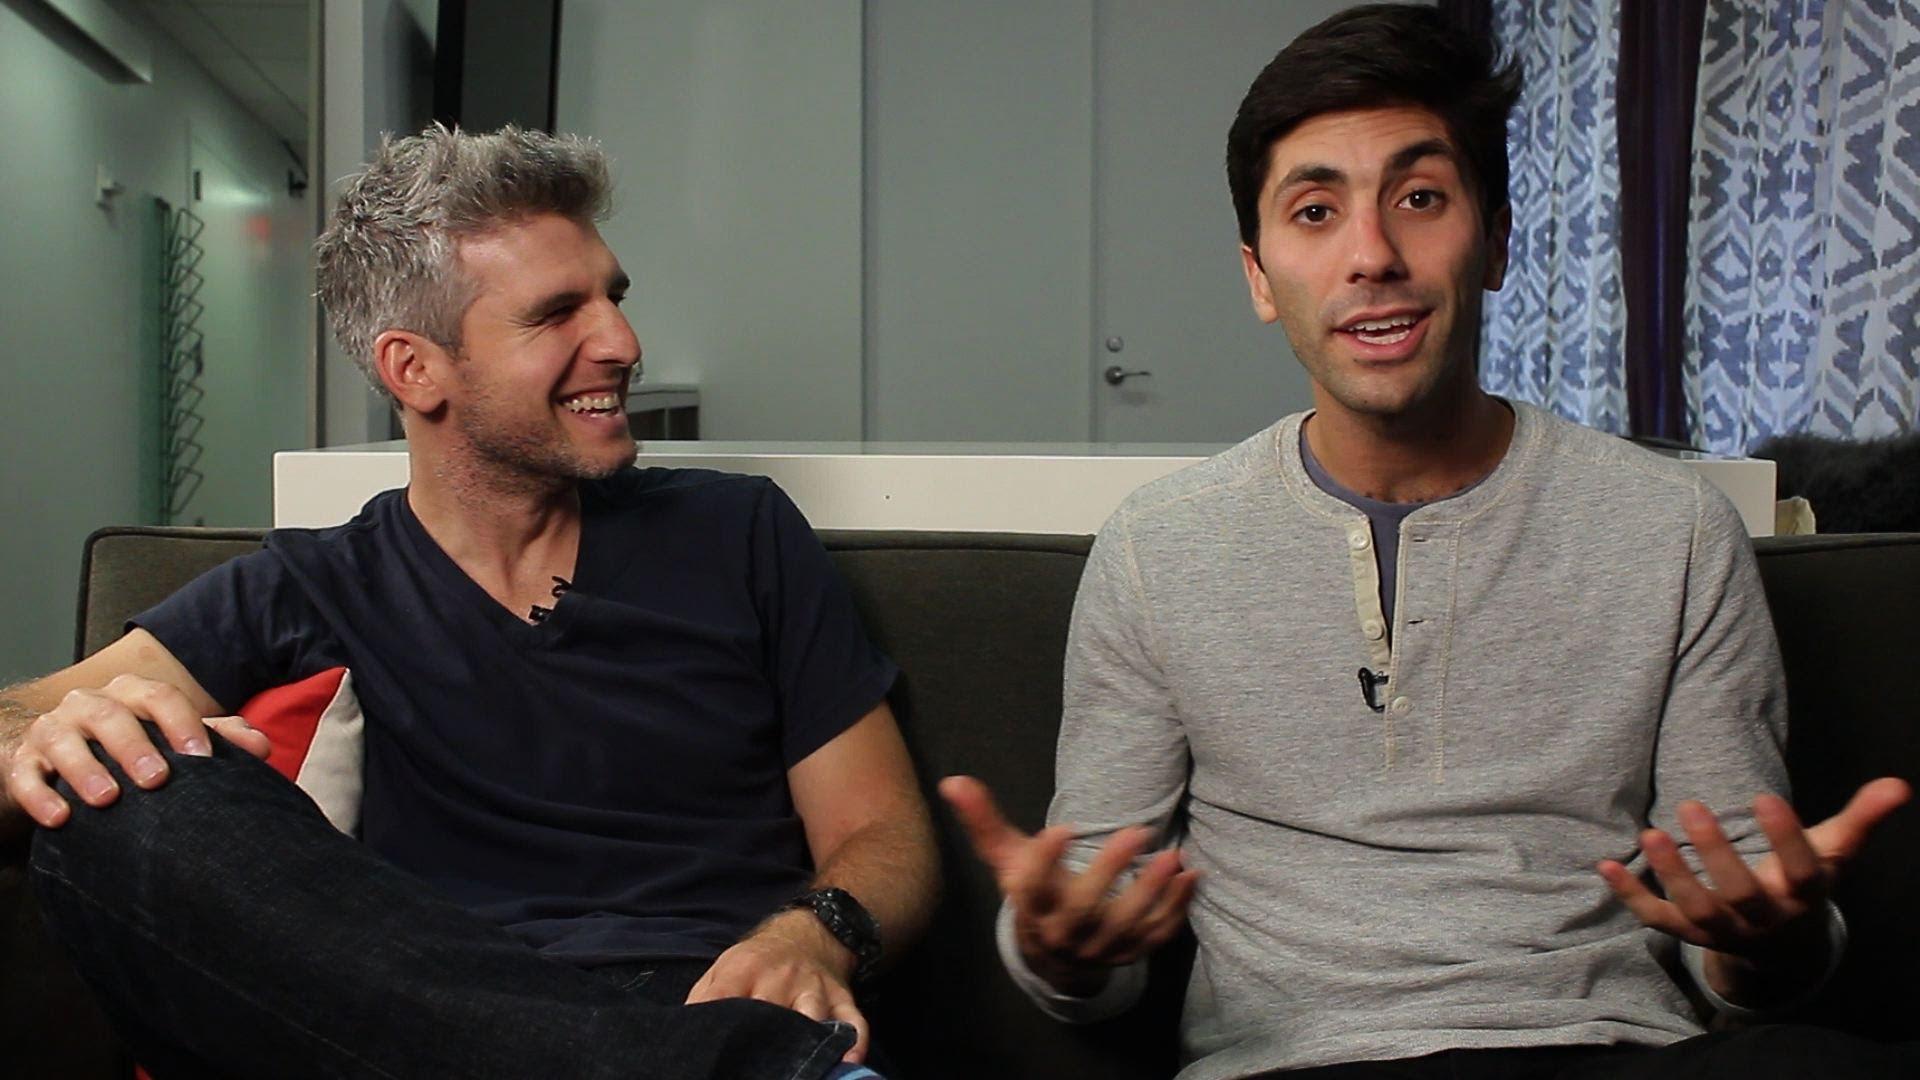 Nev Schulman and Max Joseph of MTV's Catfish: The TV Show on Reel.